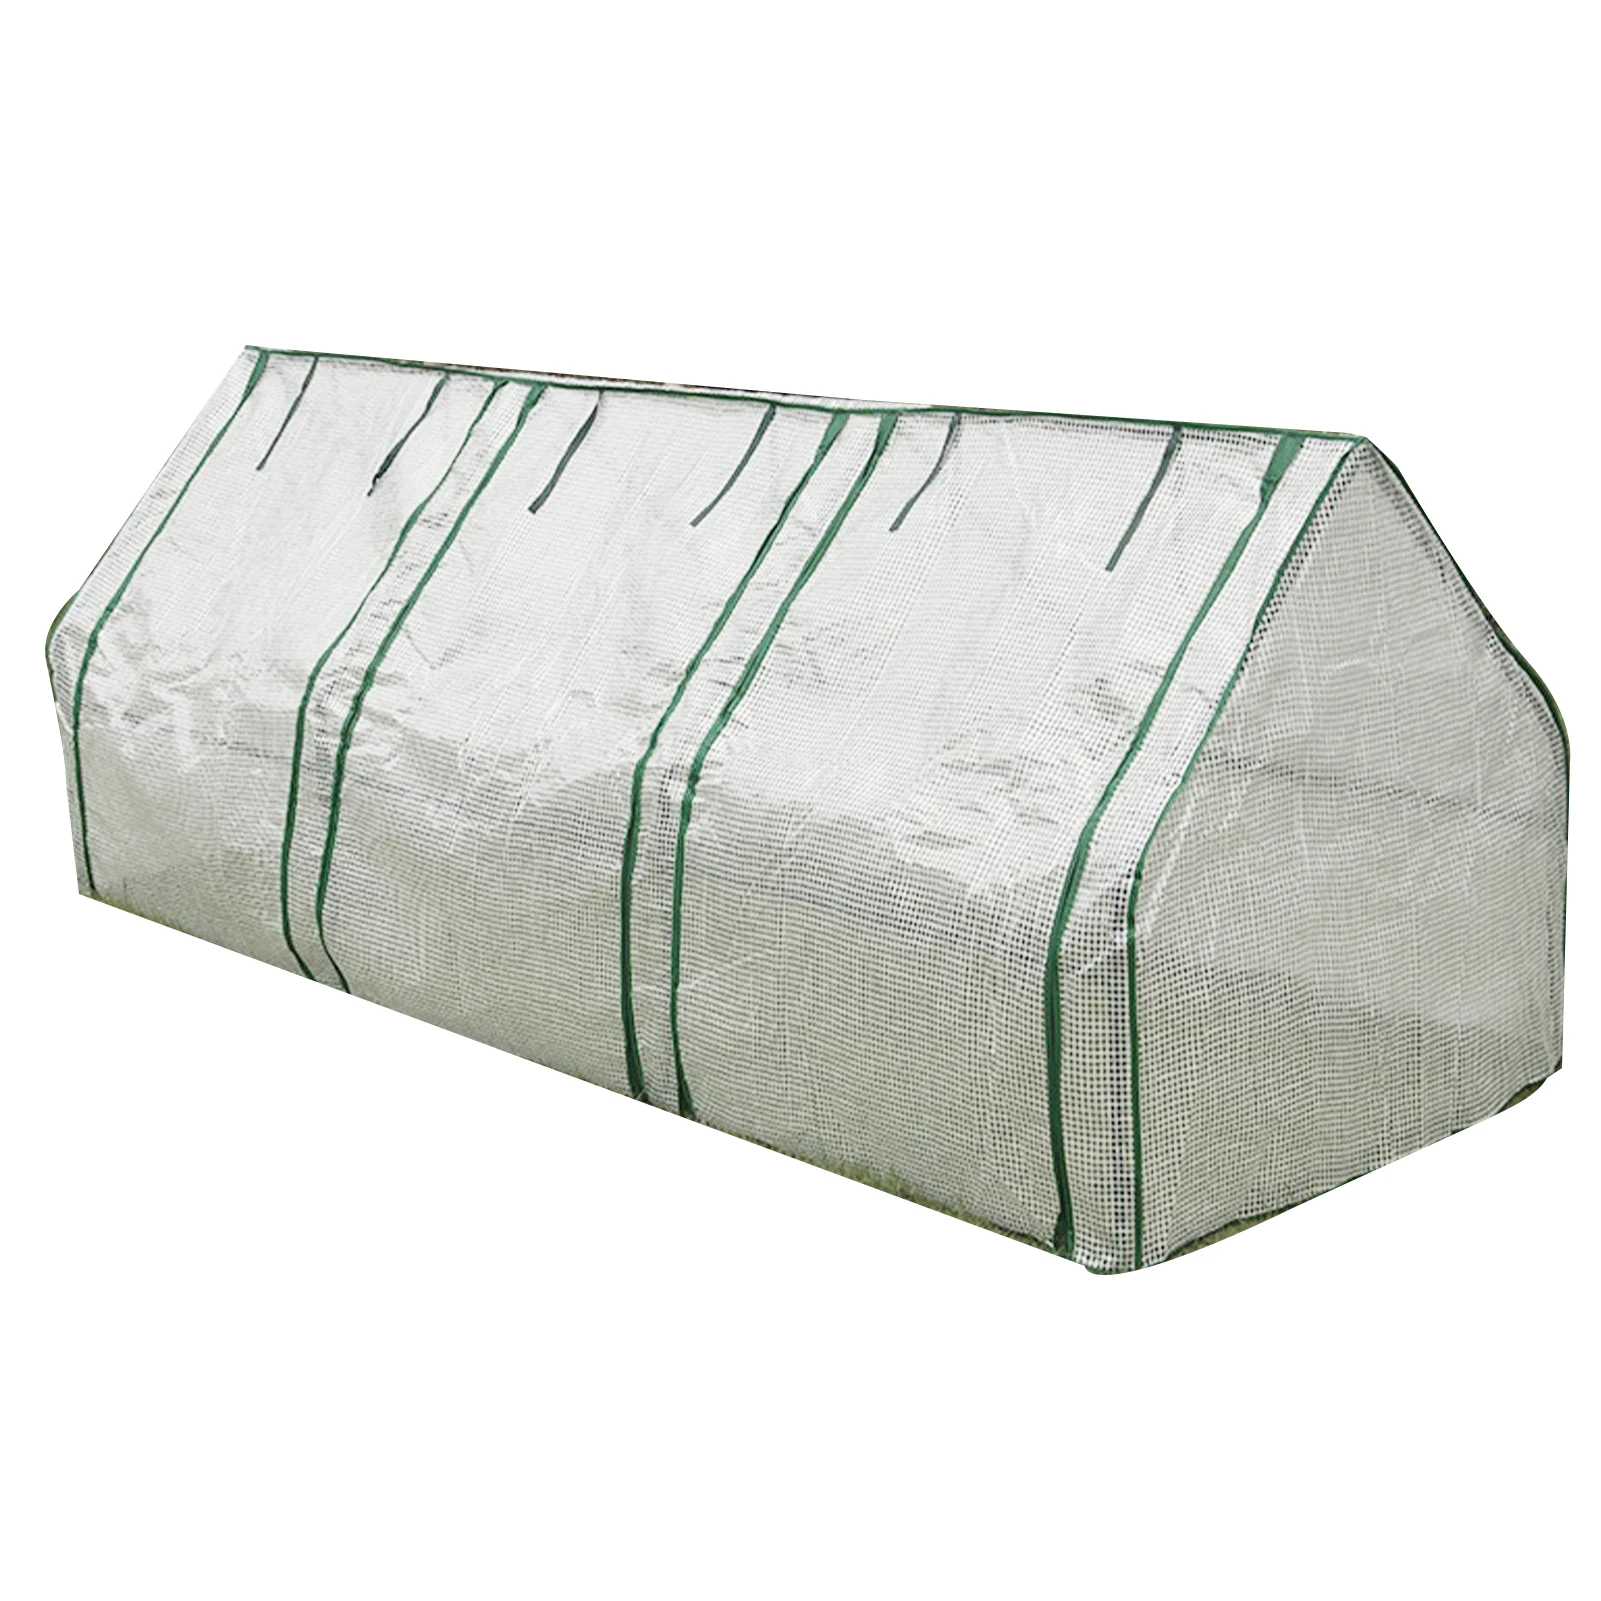 

Green House Garden Greenhouse Greenhouse Cover Bracket Not Included Greenhouses For Outdoors Winter Reinforced PE Cover Portable